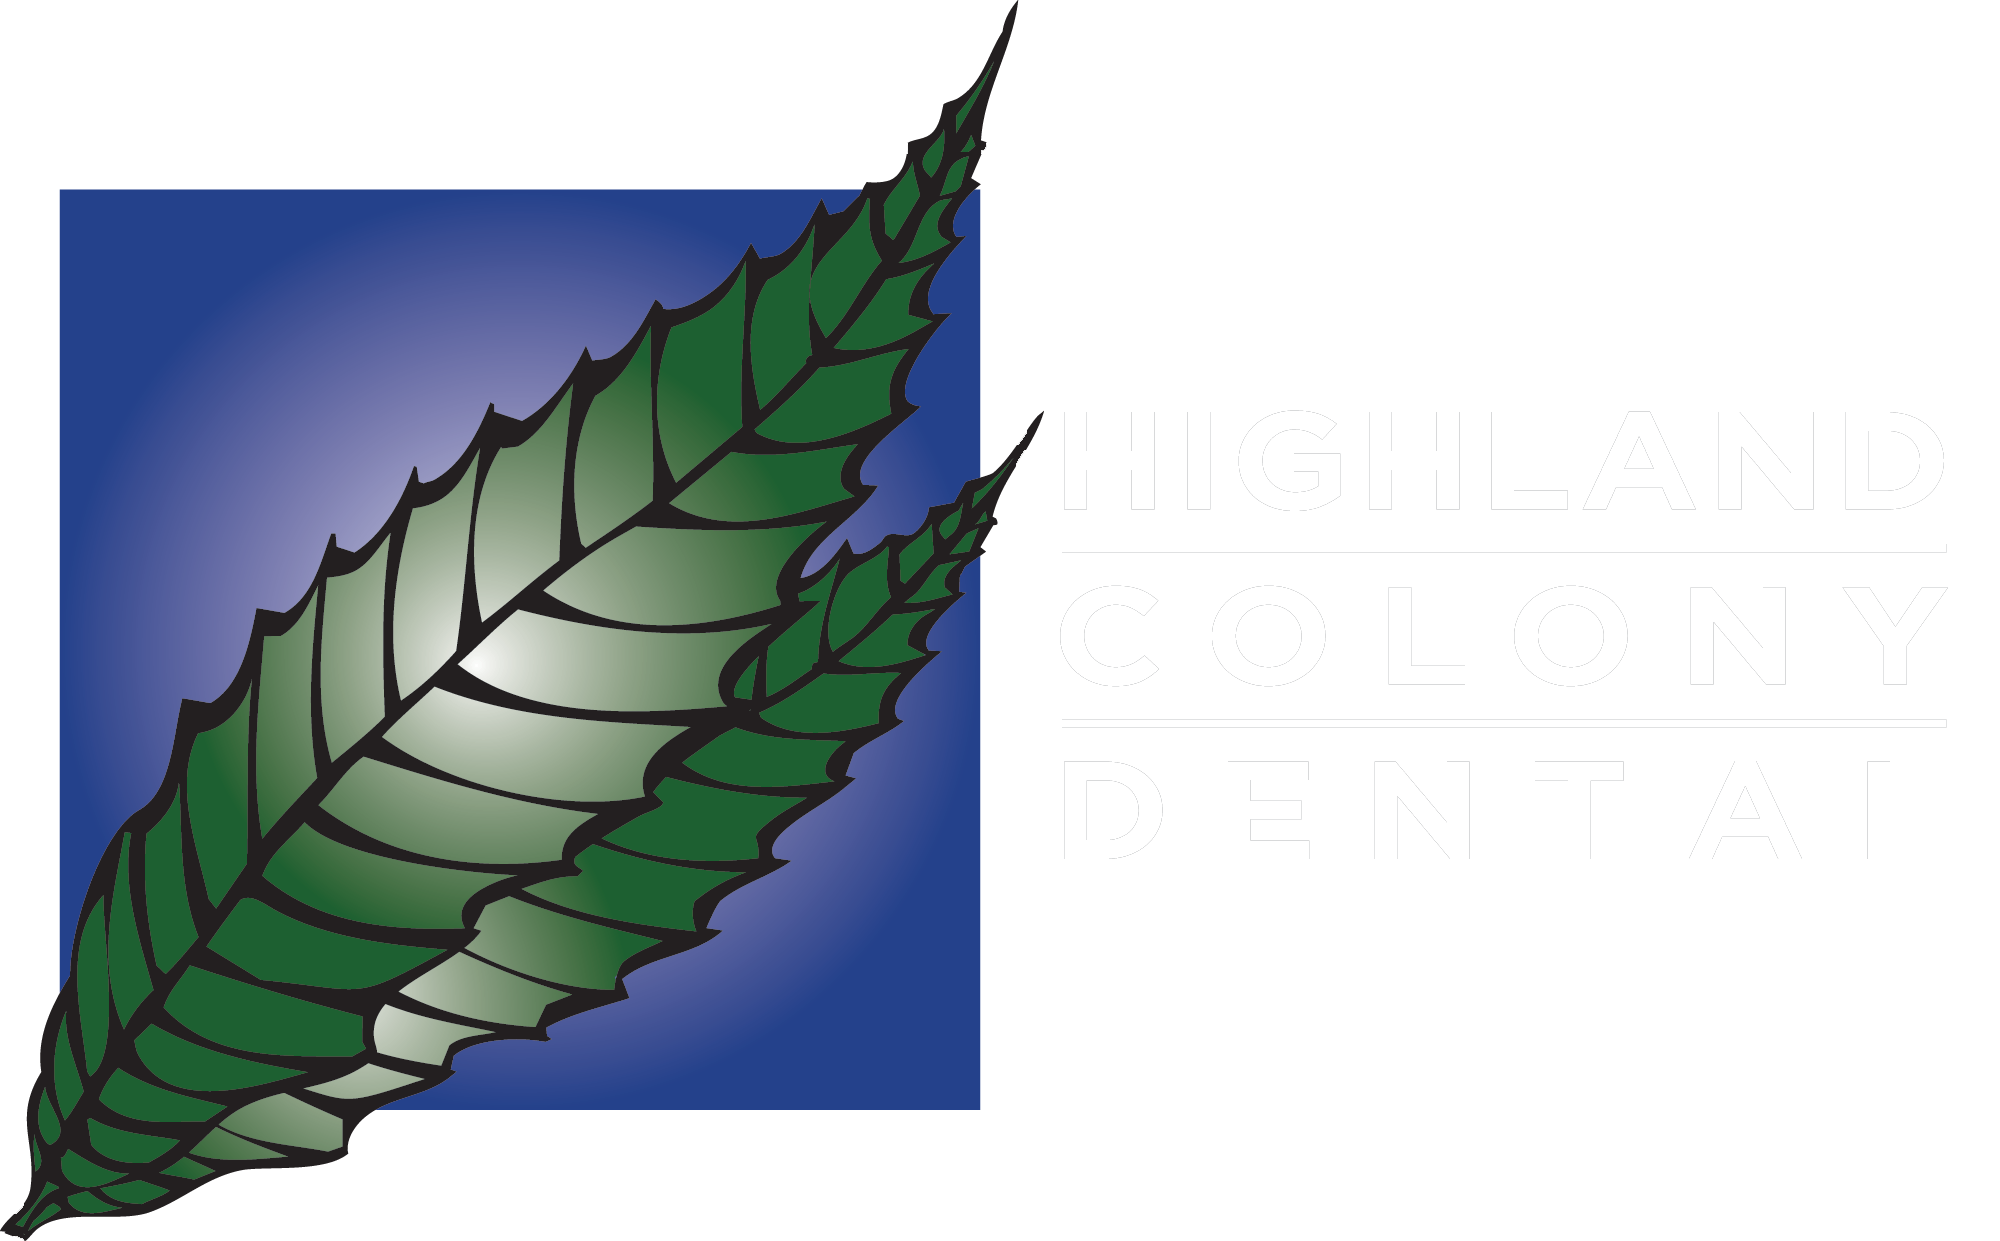 Link to Highland Colony Dental home page